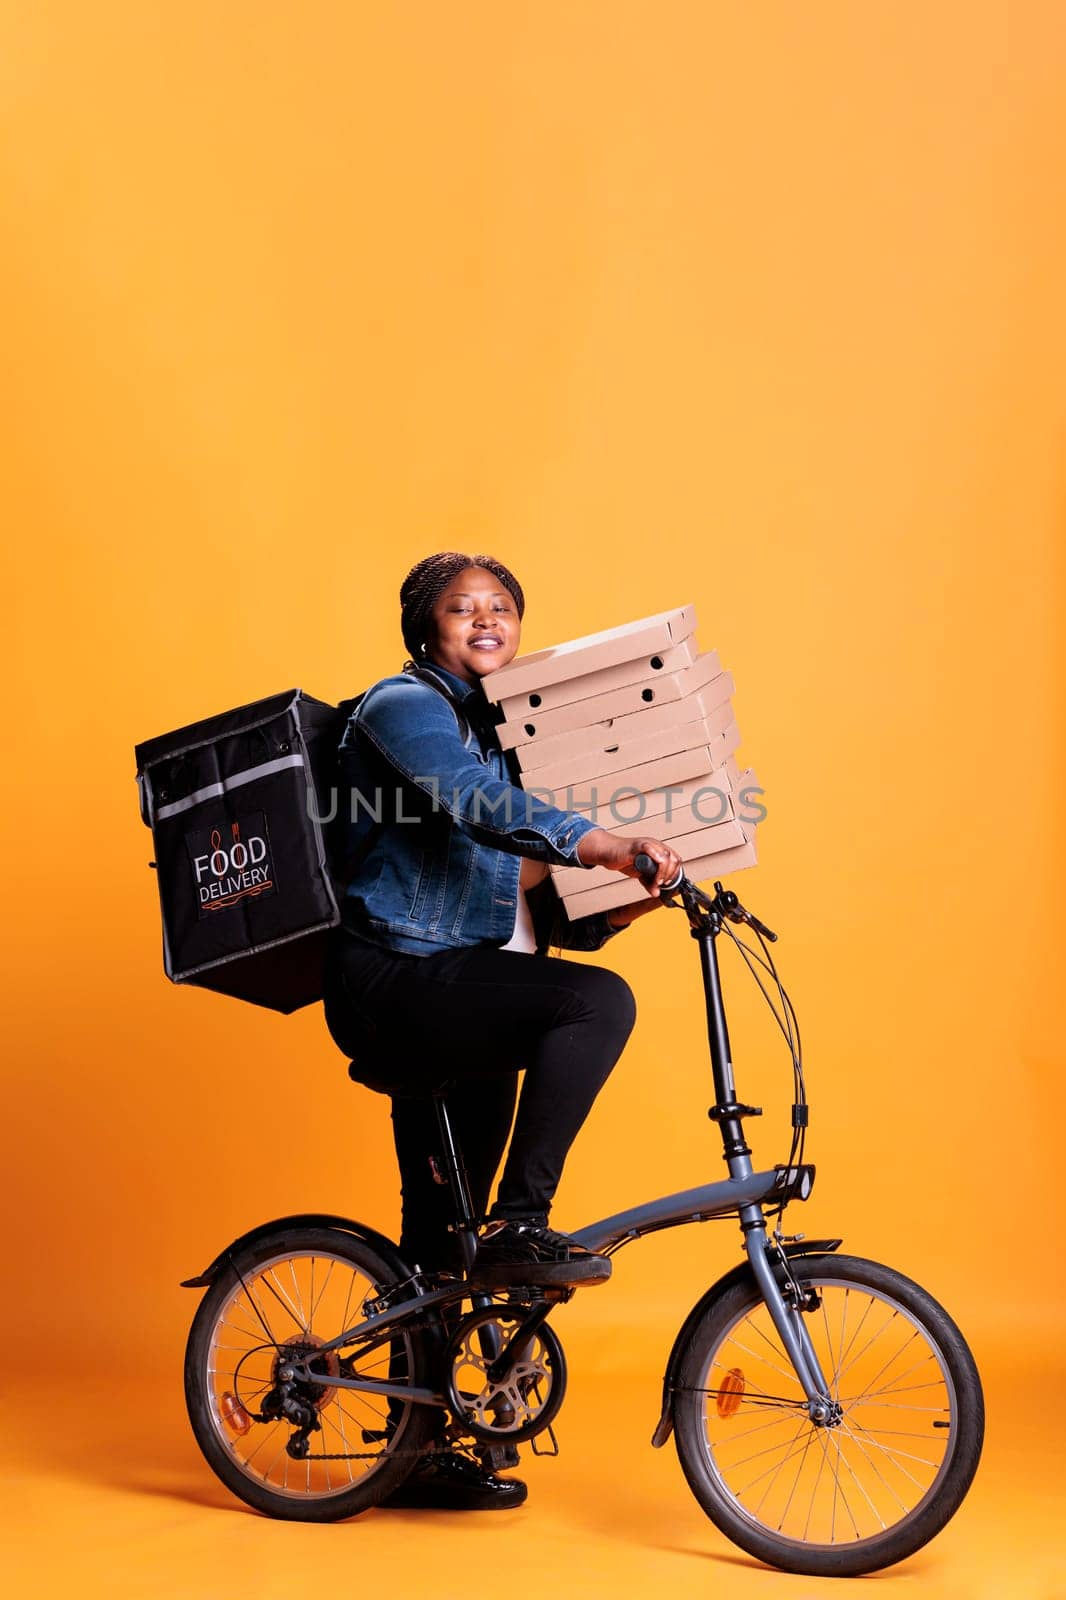 Restaurant worker riding bike while carrying stack of pizza delivering takeaway food meal by DCStudio